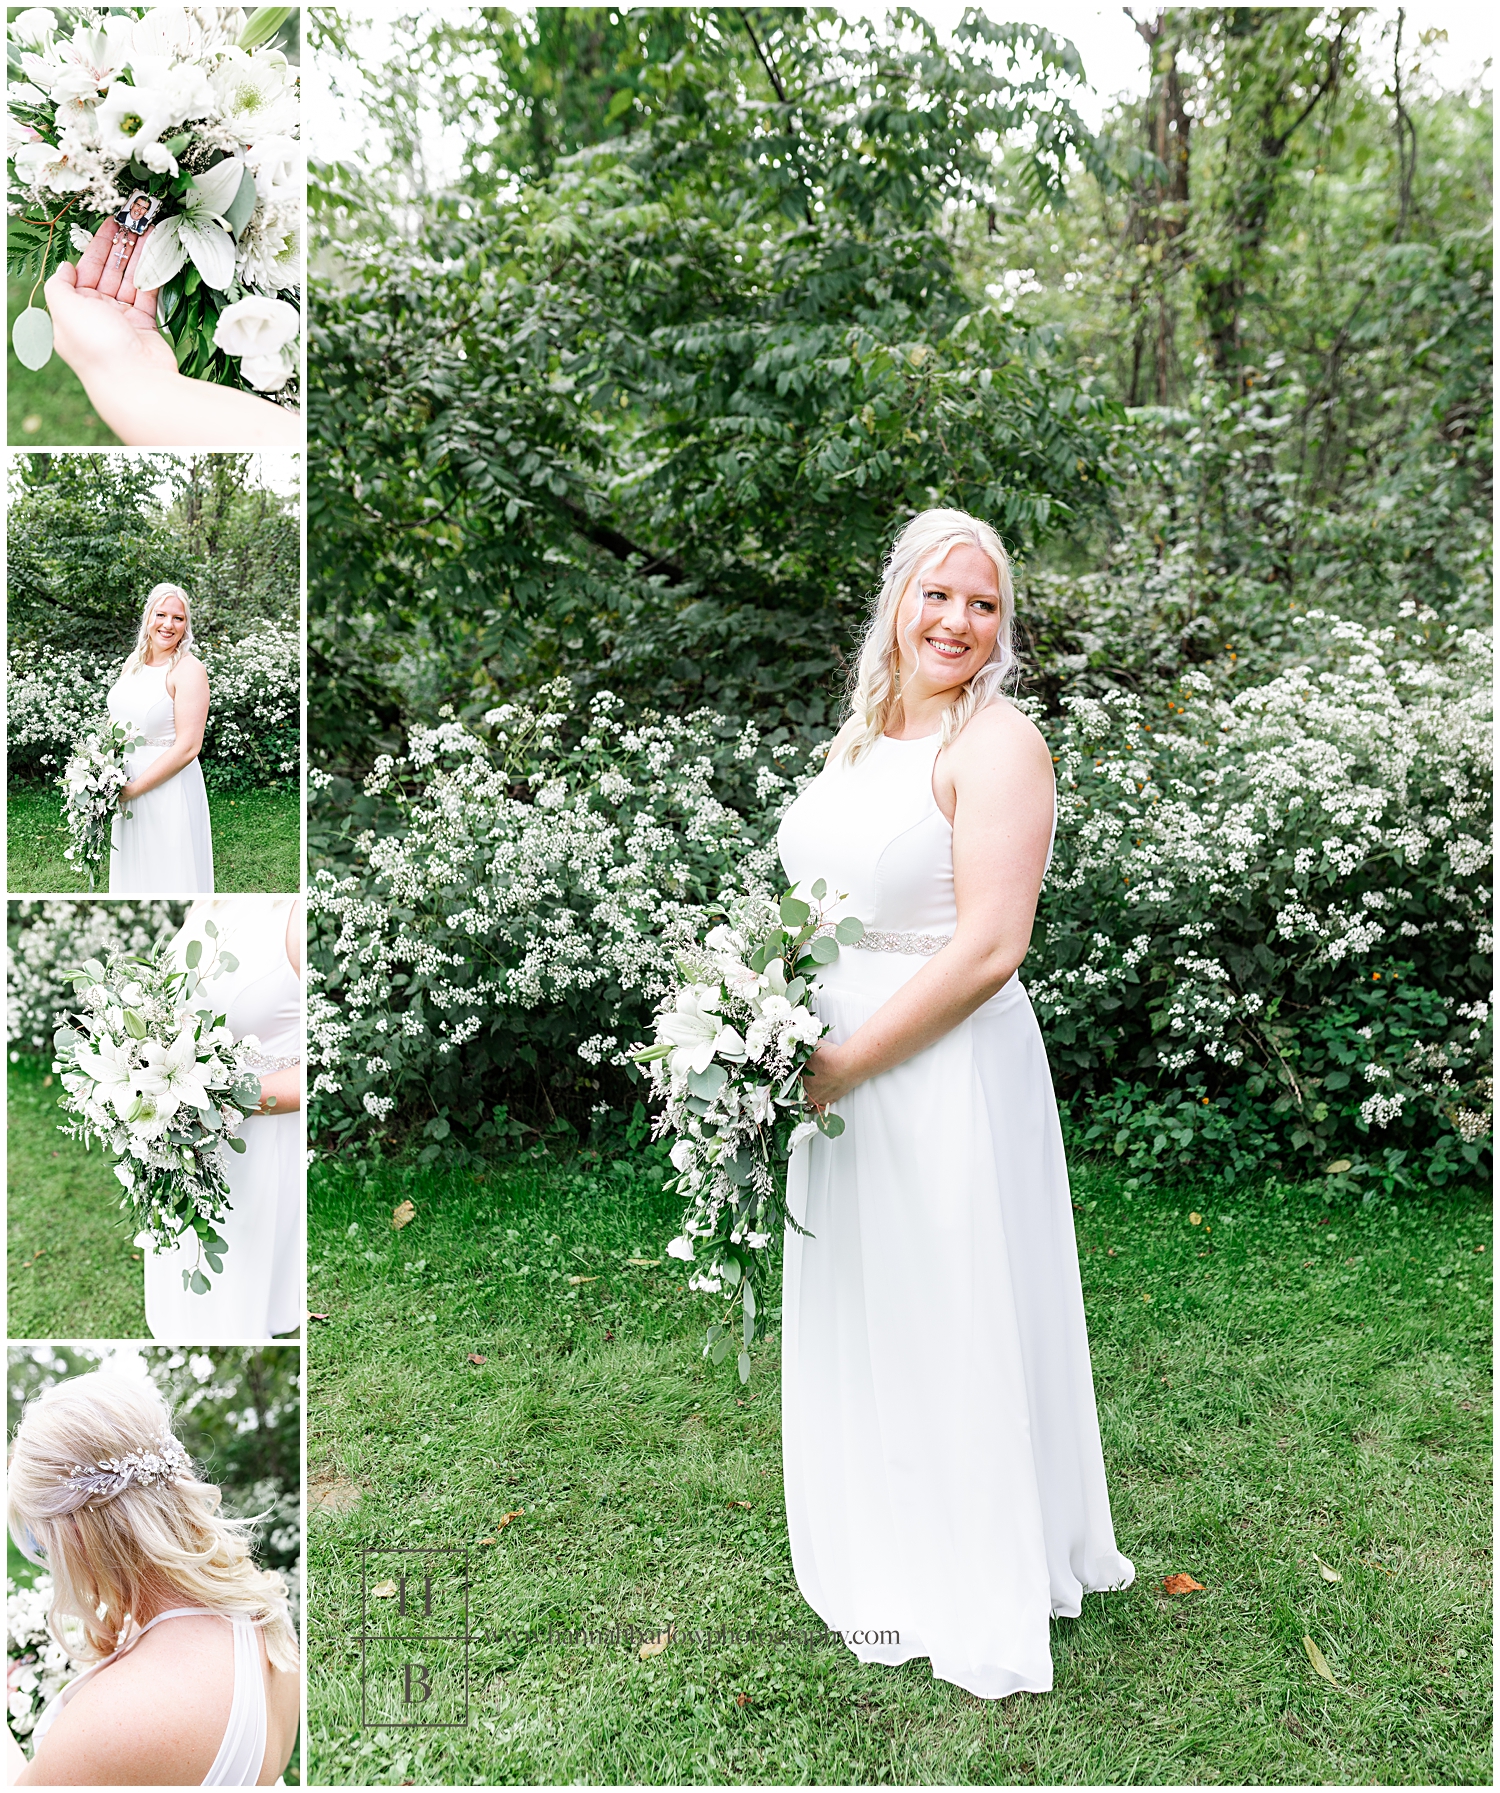 Bride poses for wedding photos by Queen Anne's Lace Flowers